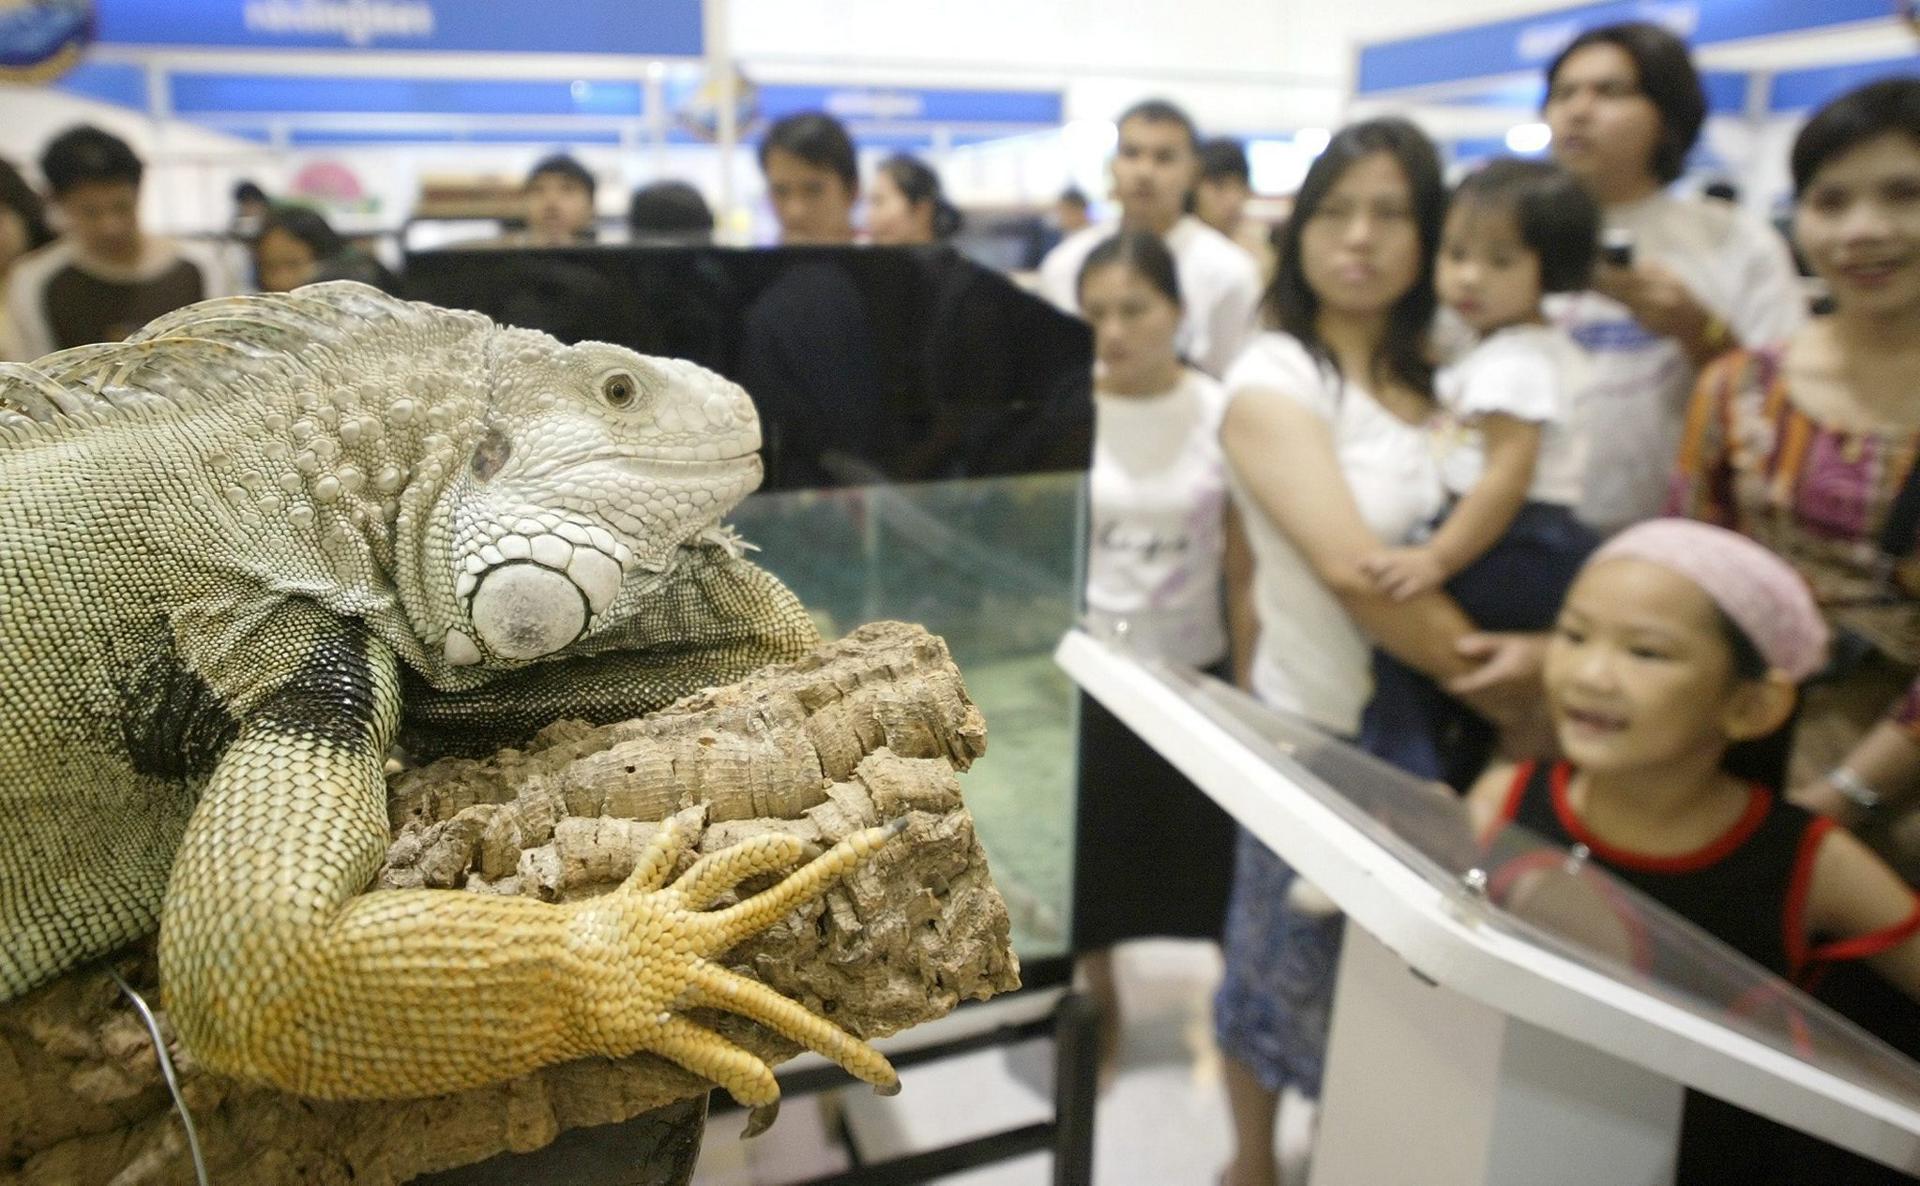 Thai crowds observe an iguana on display in a shopping centre in Bangkok, Thailand, Monday 18 October 2004 in an exhibition featuring many endangered species. EPA-EFE FILE/RUNGROJ YONGRIT